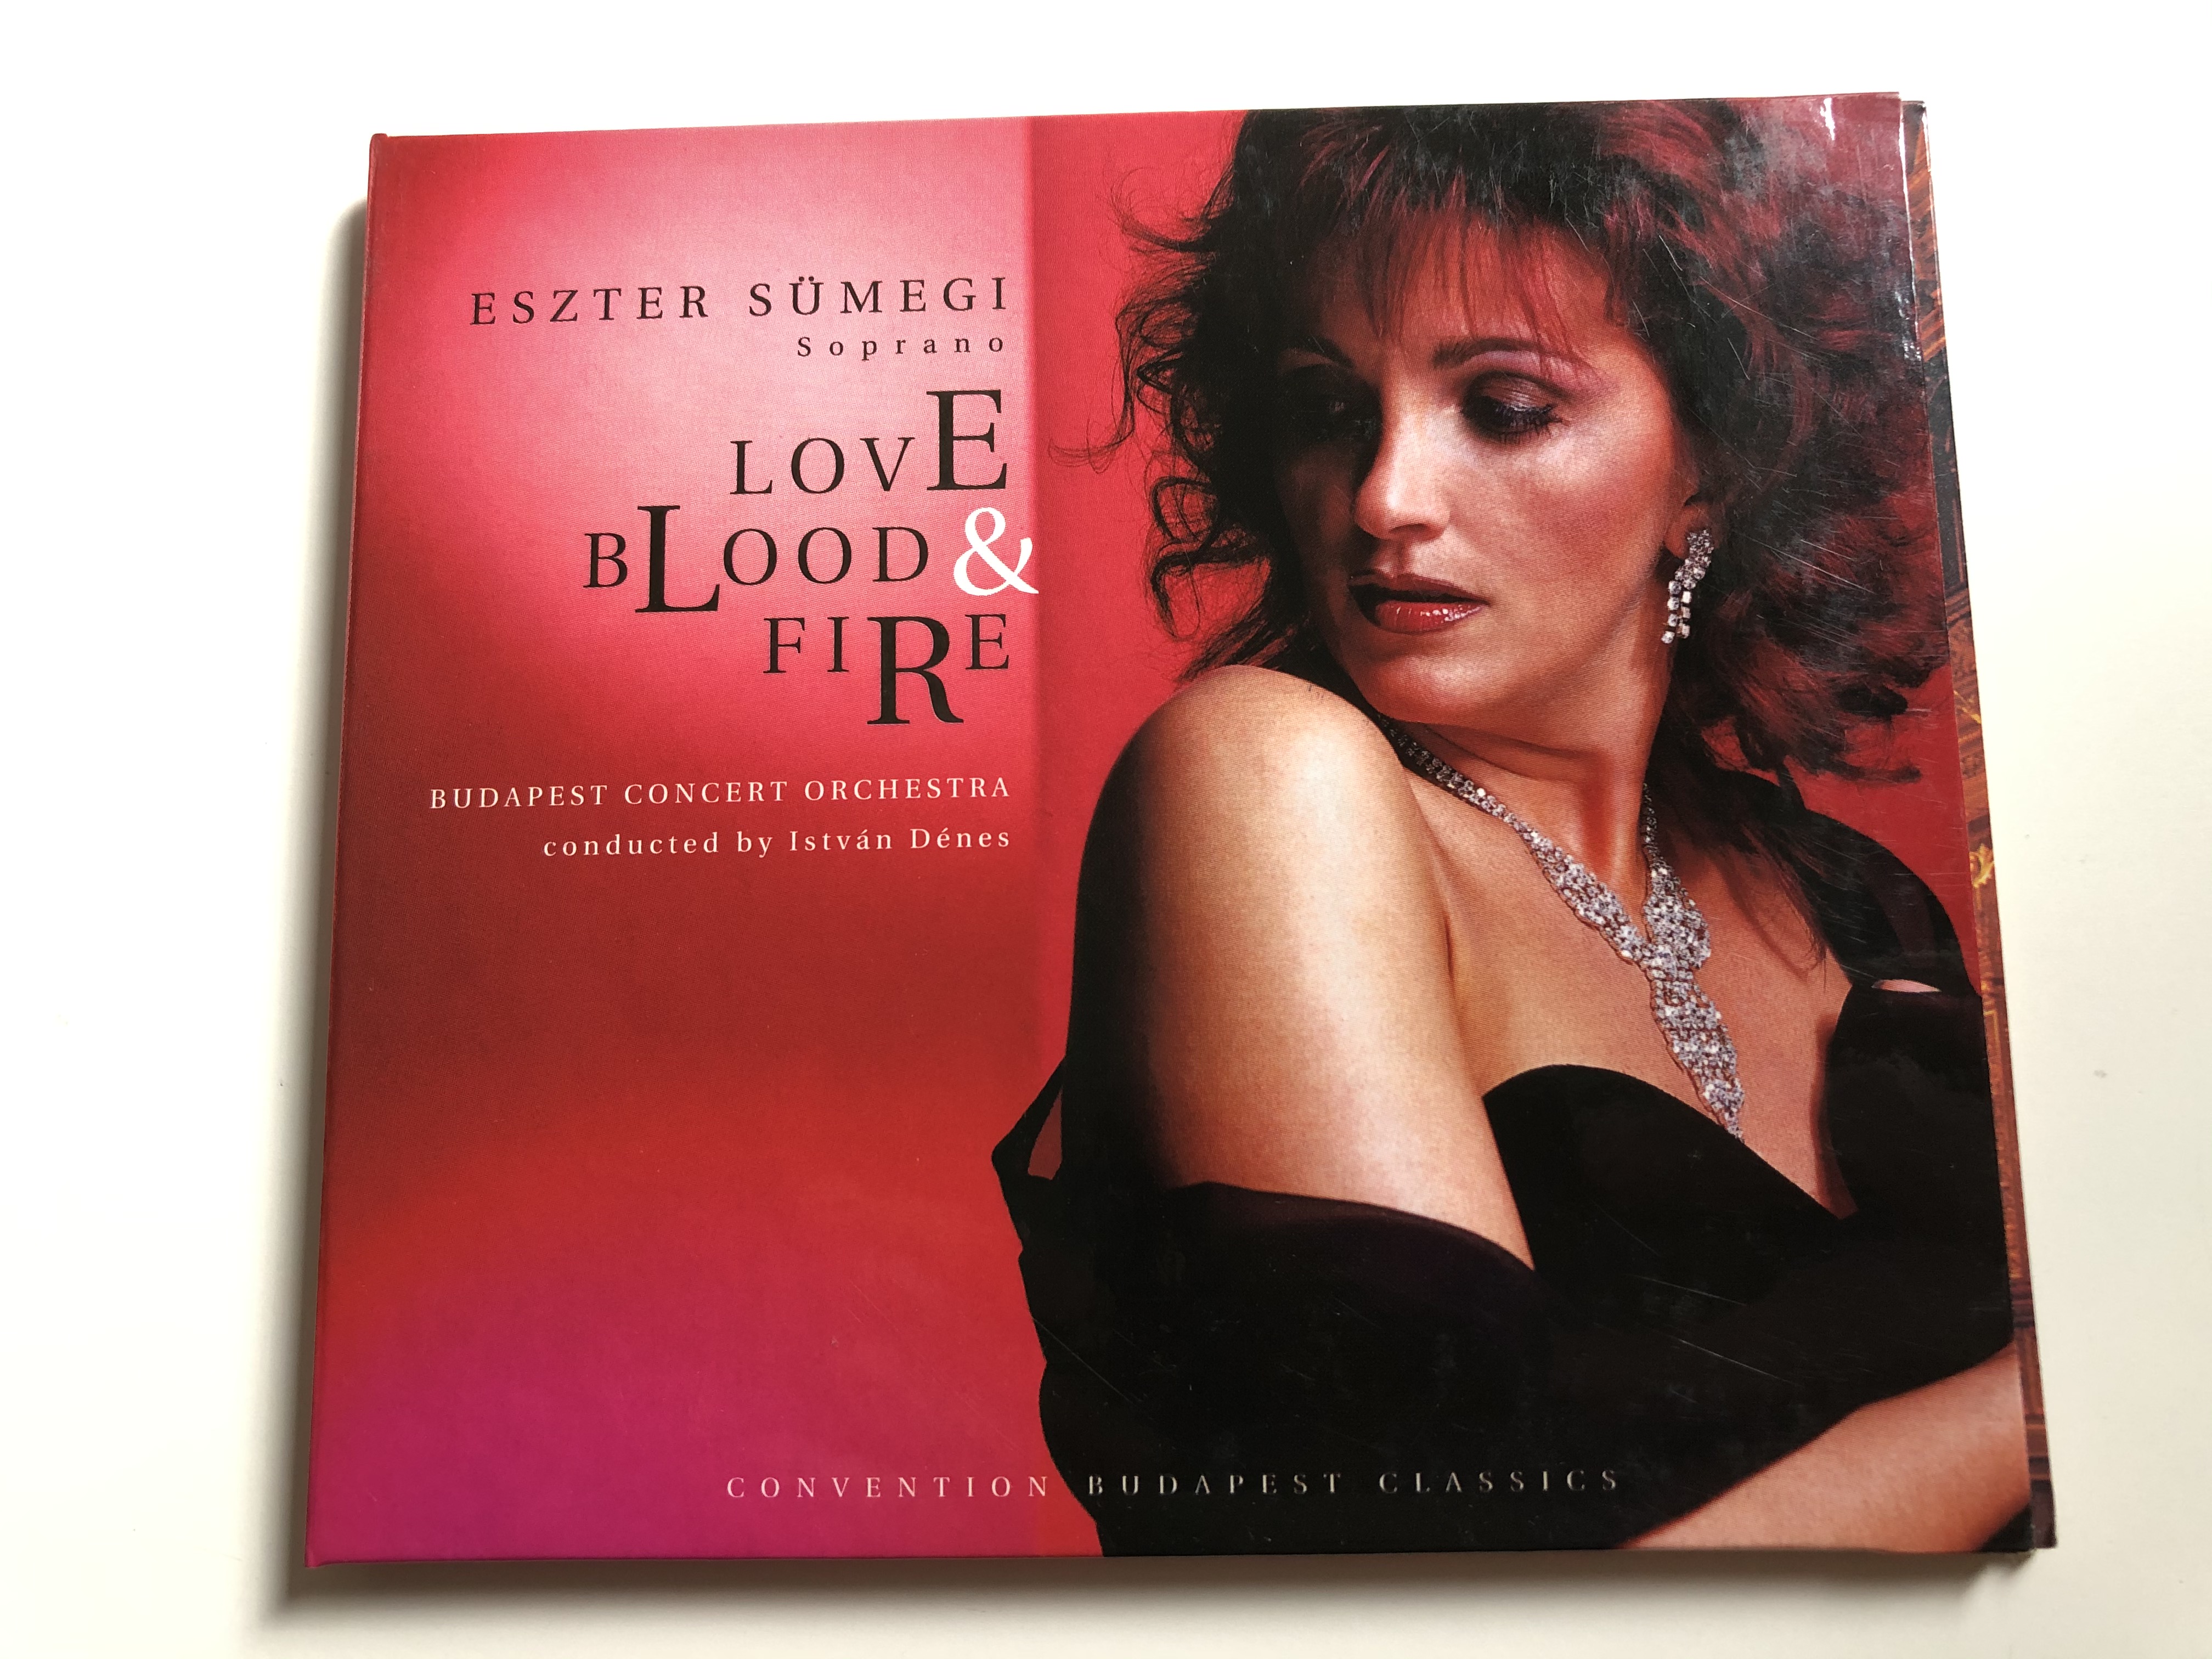 eszter-s-megi-soprano-love-blood-fire-budapest-concert-orchestra-conducted-by-istv-n-d-nes-convention-budapest-classics-audio-cd-cbp-016-1-.jpg